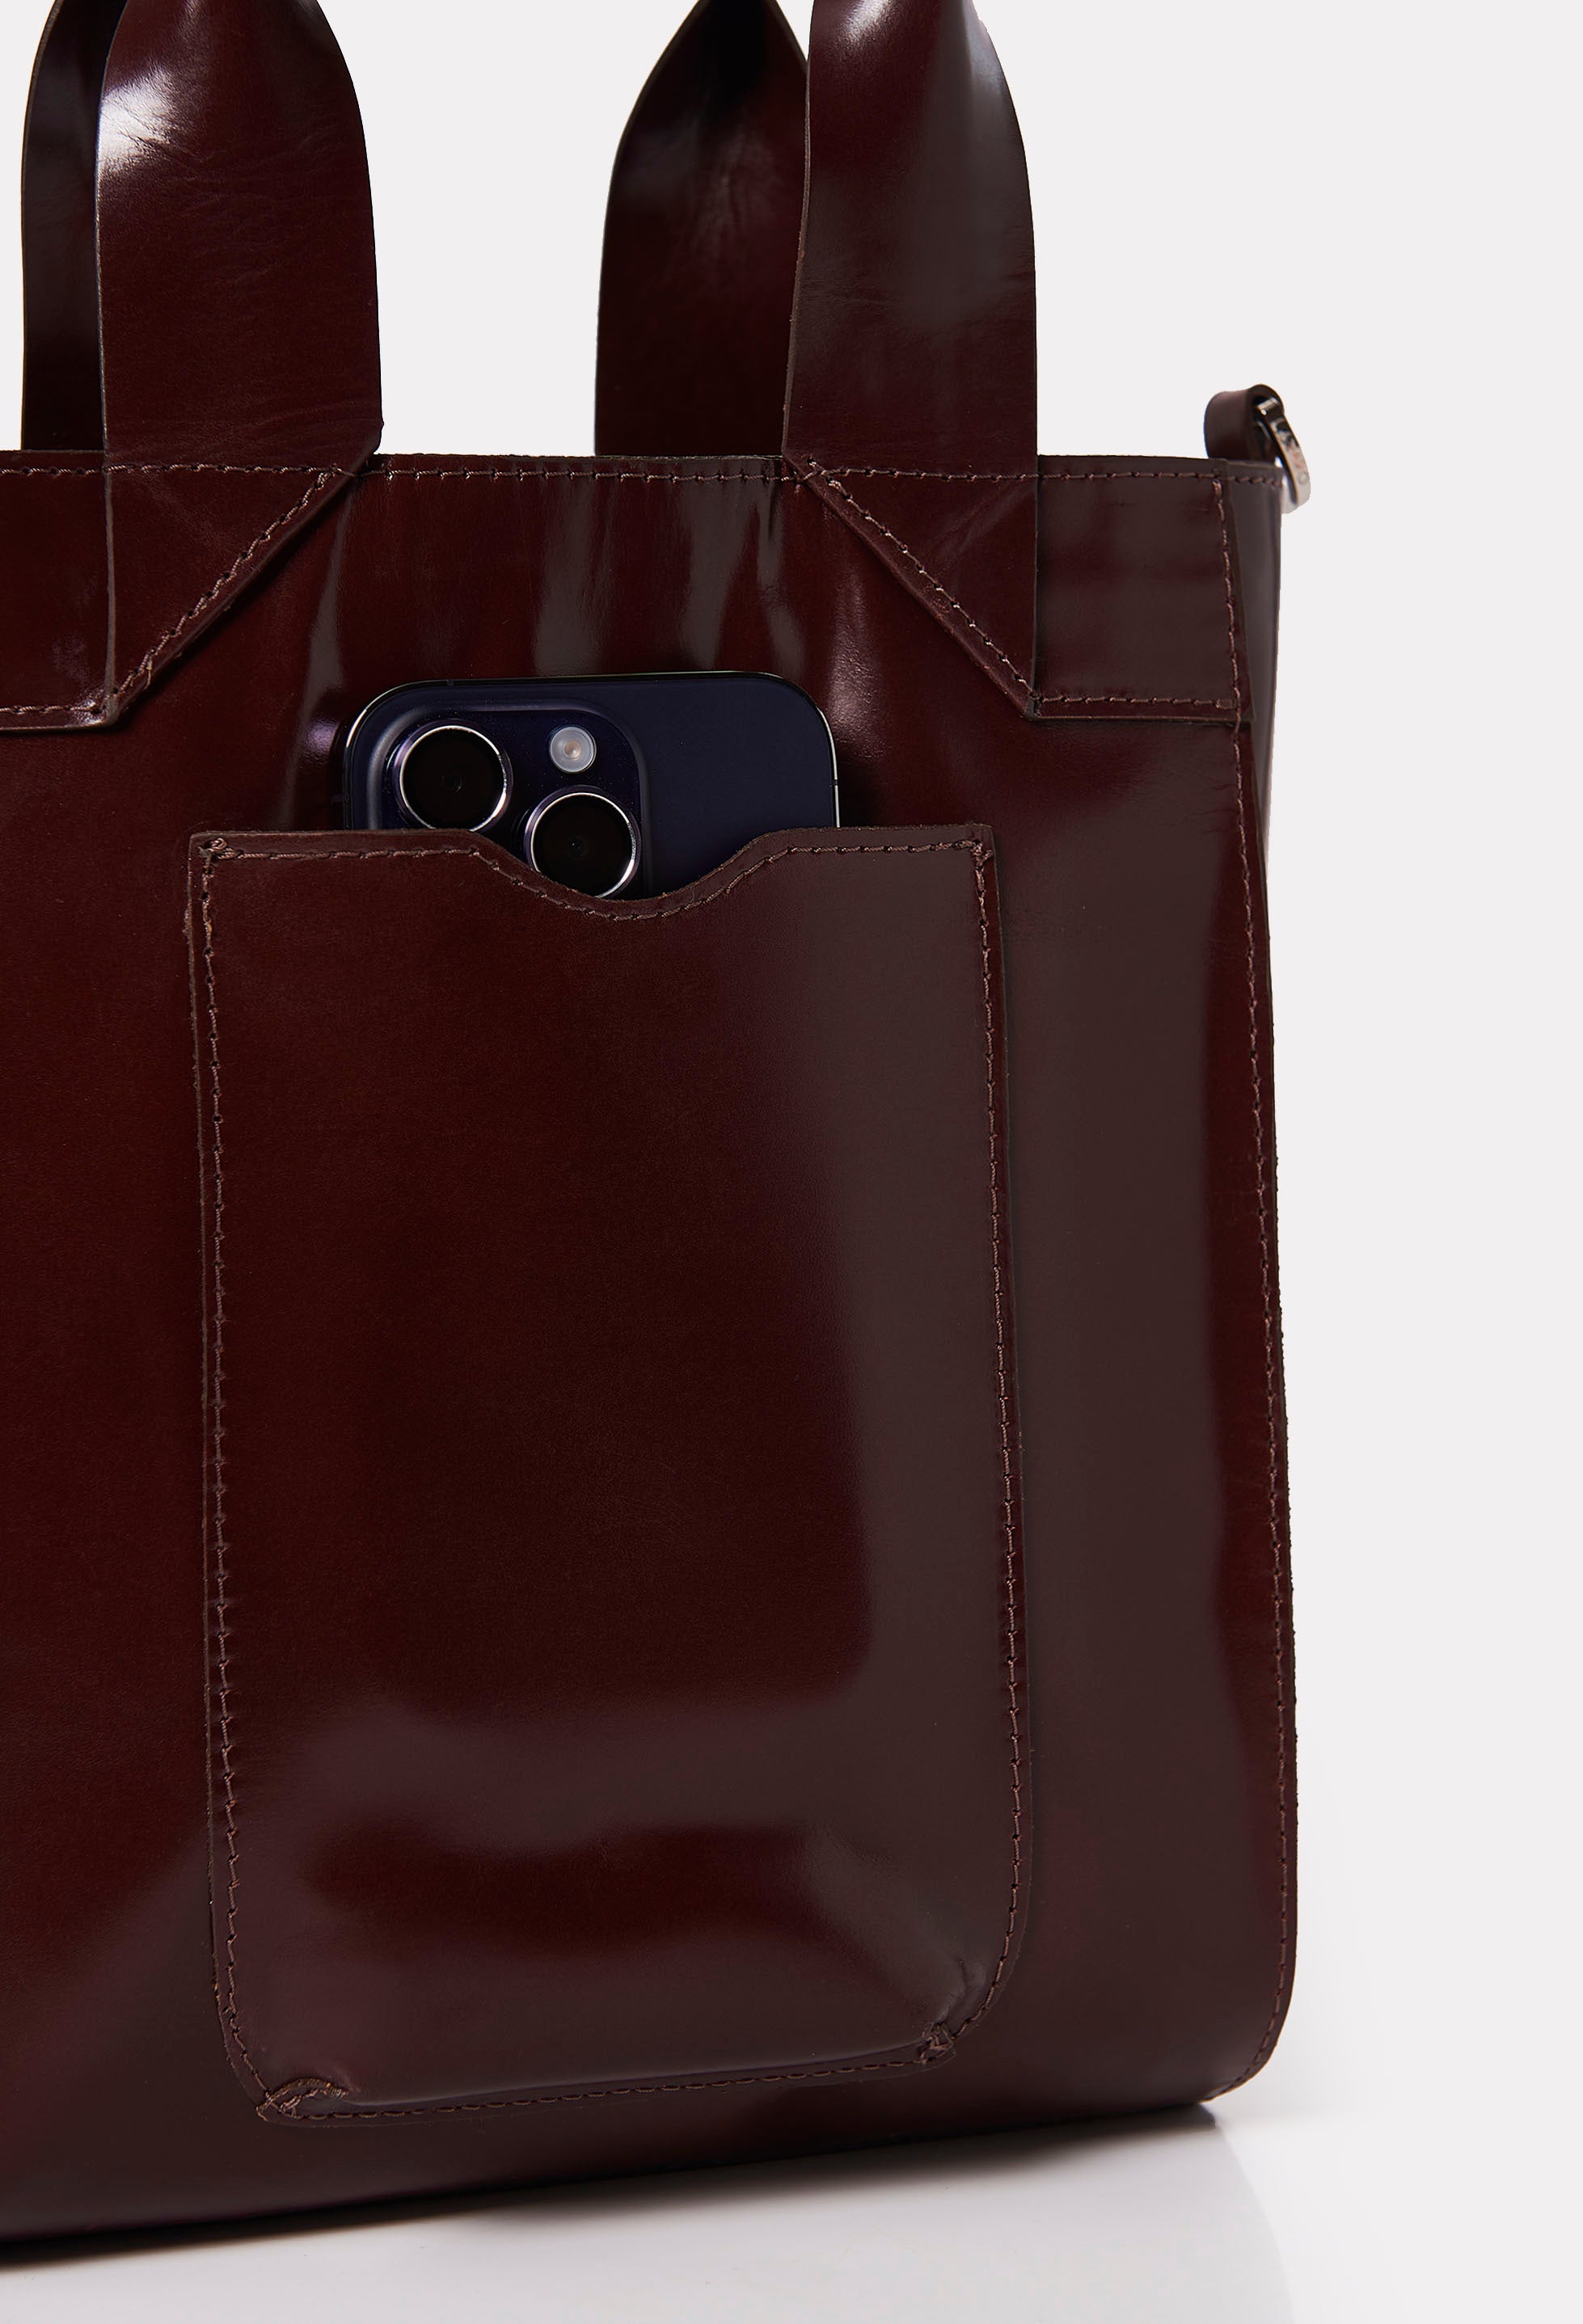 Partial photo of a Coffee Leather Mini Tote Bag Lambro with an external cell phone holder pocket.